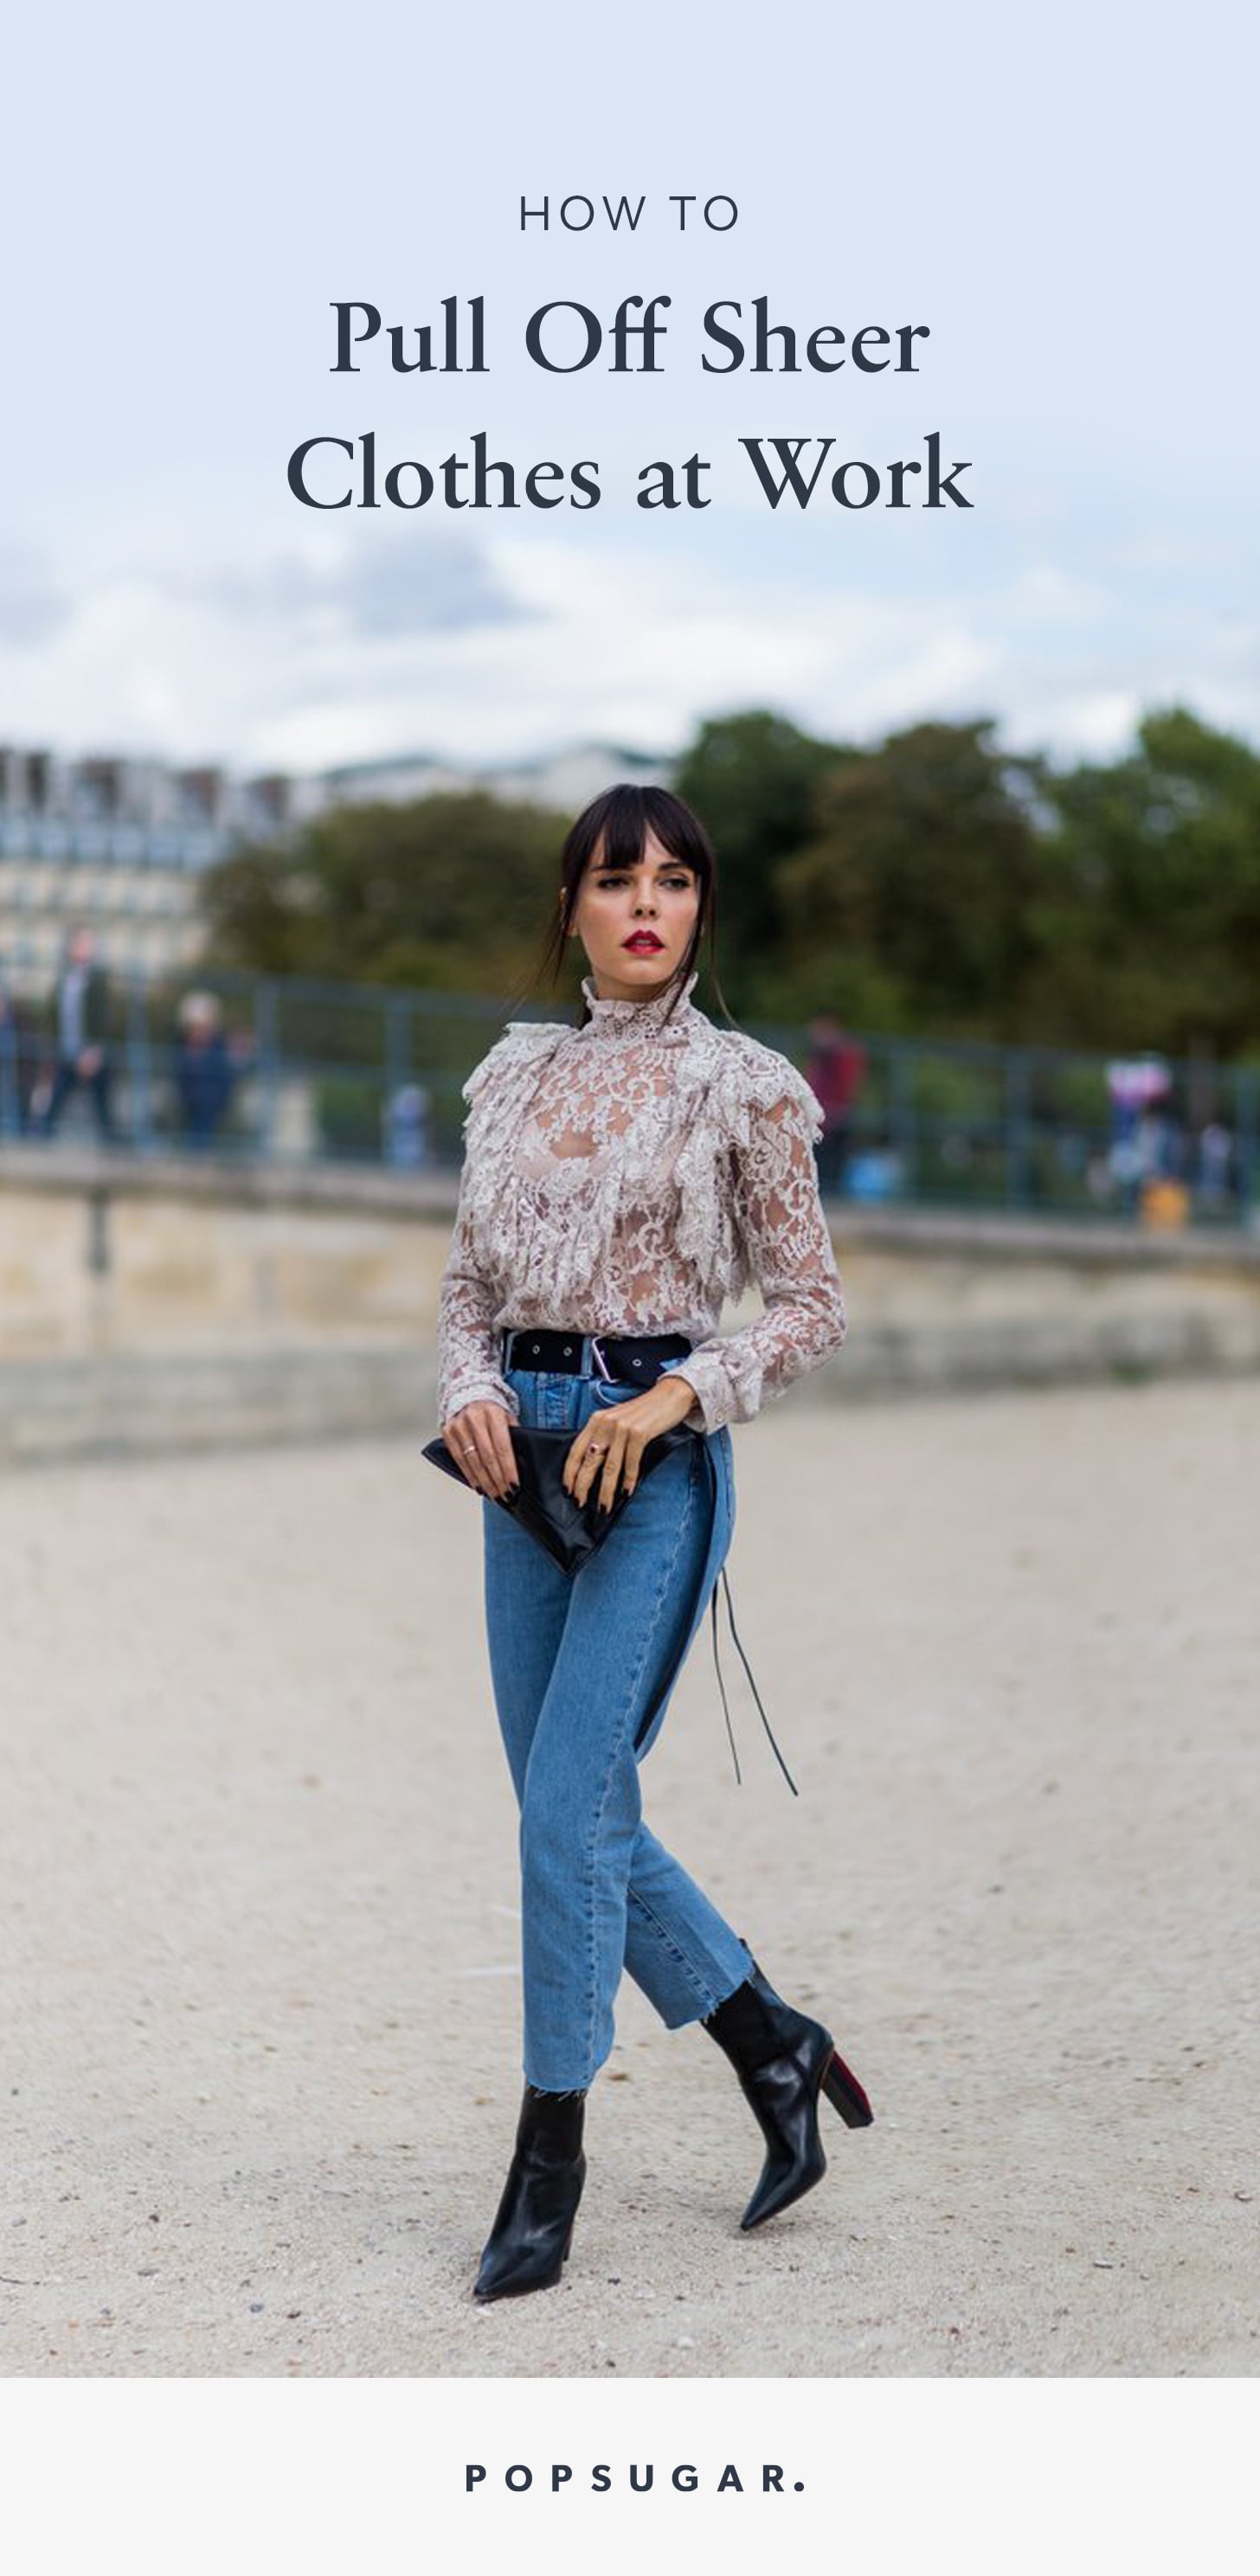 How To Wear A Sheer Top And Look Elegant — The Wardrobe Consultant